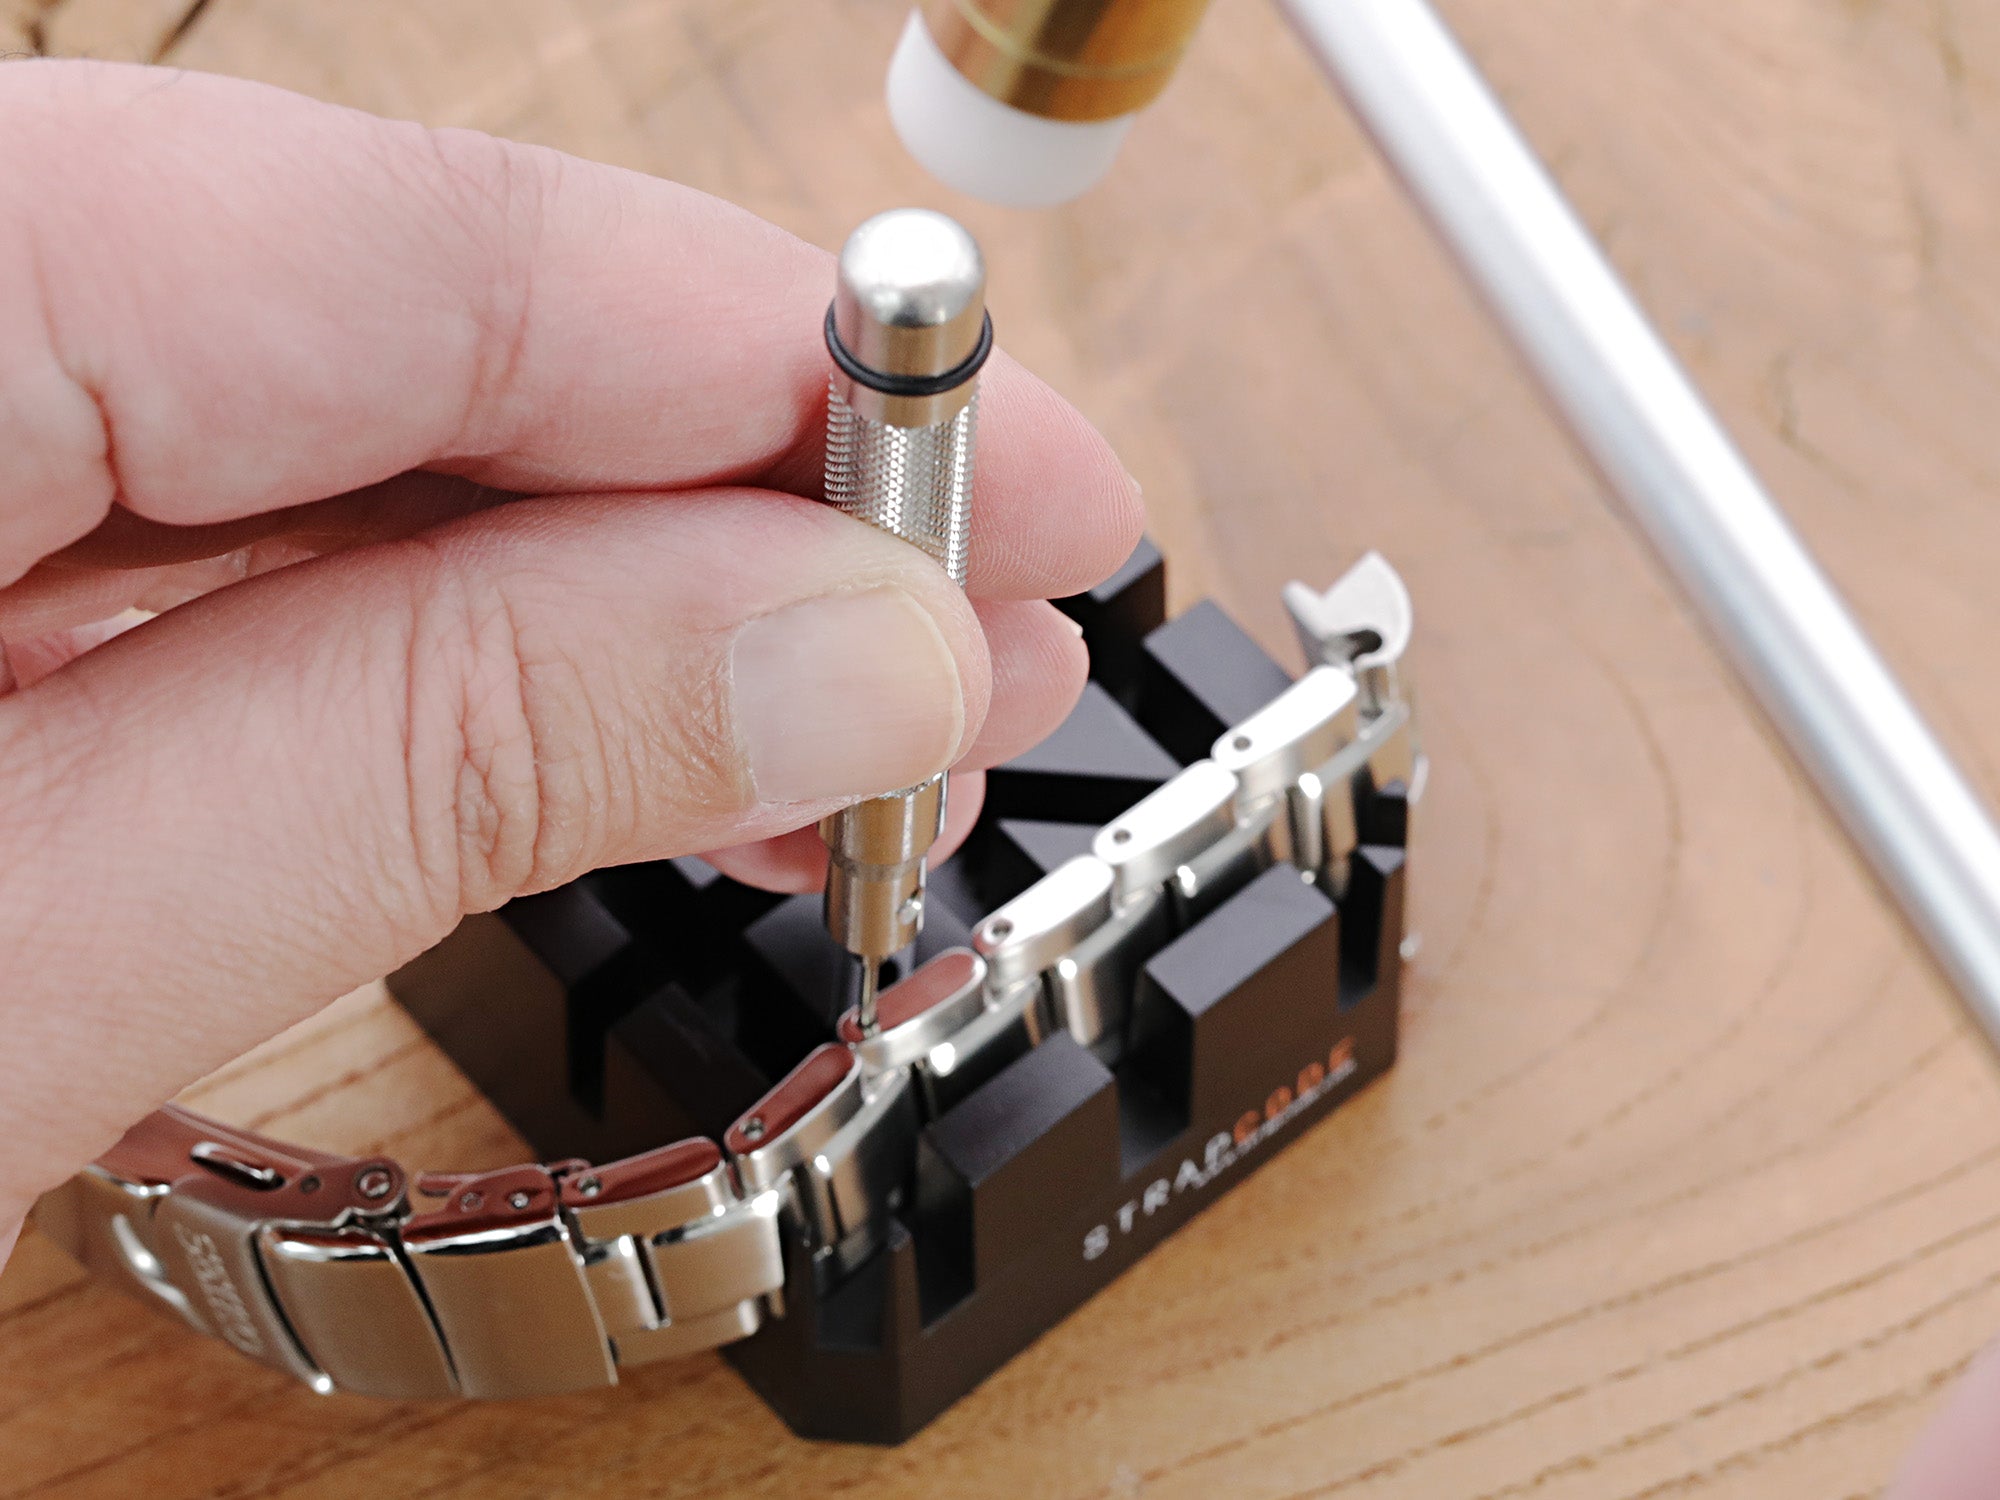 Demo of how to remove watch band pins by using proper watch band tools